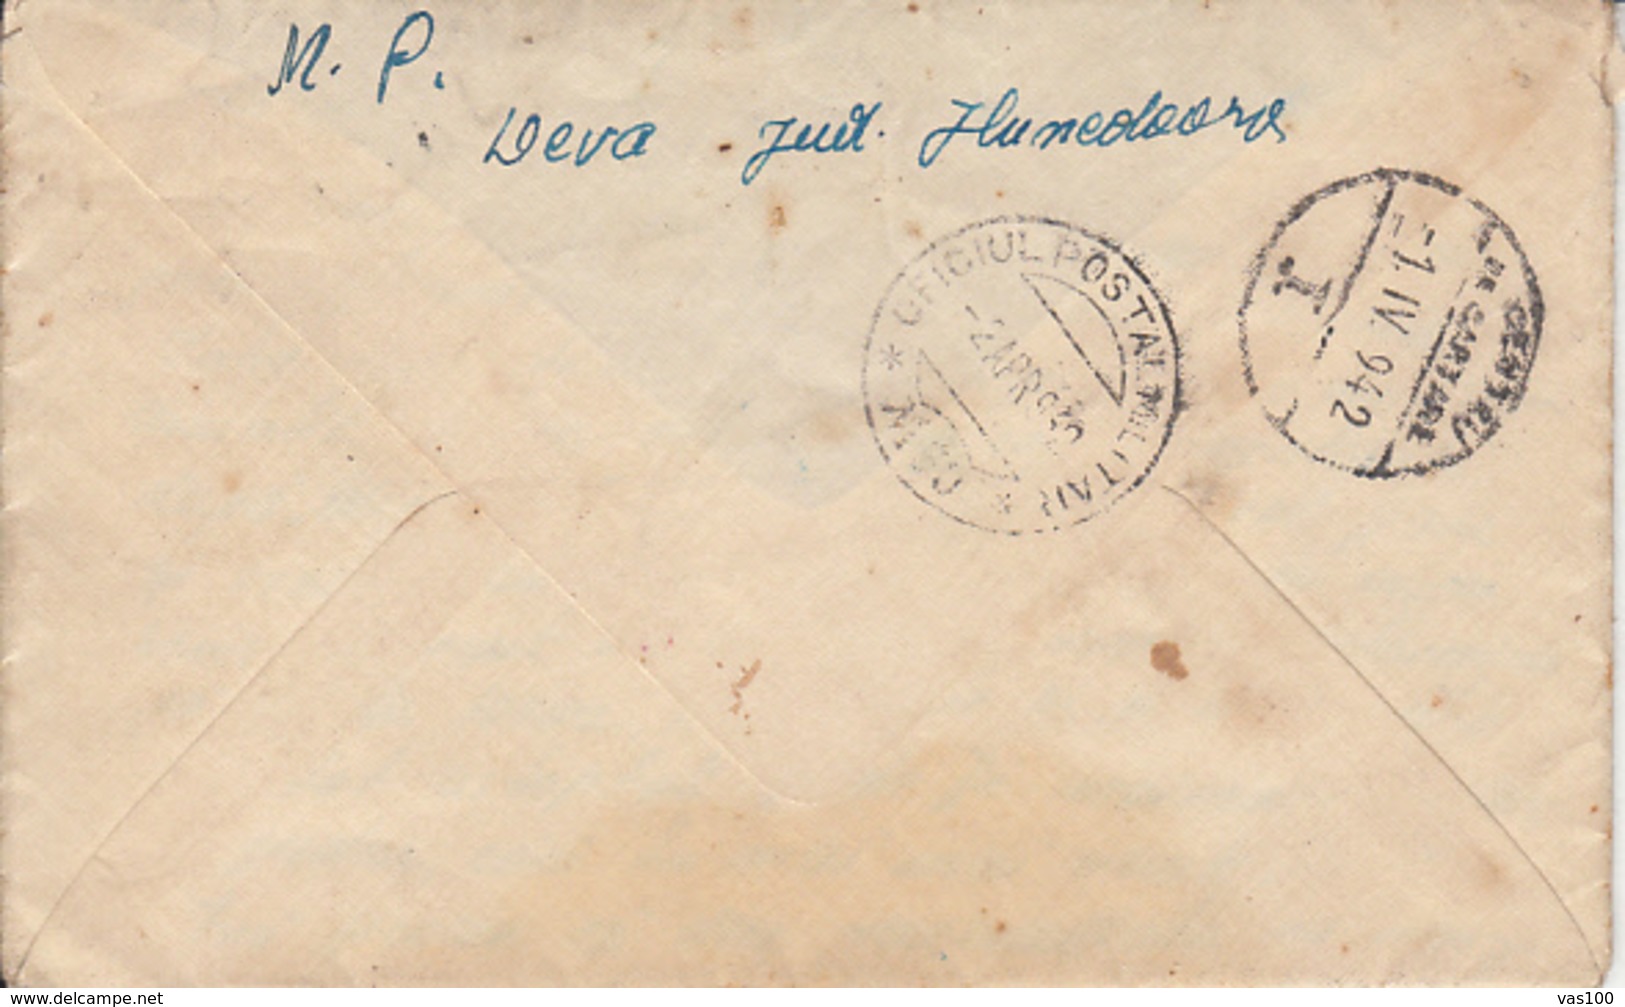 WW2 LETTER, MILITARY CENSORED, DEVA NR 23, WARFIELD POST OFFICE NR 30, 176, KING MICHAEL STAMP ON COVER, 1942, ROMANIA - Lettres 2ème Guerre Mondiale